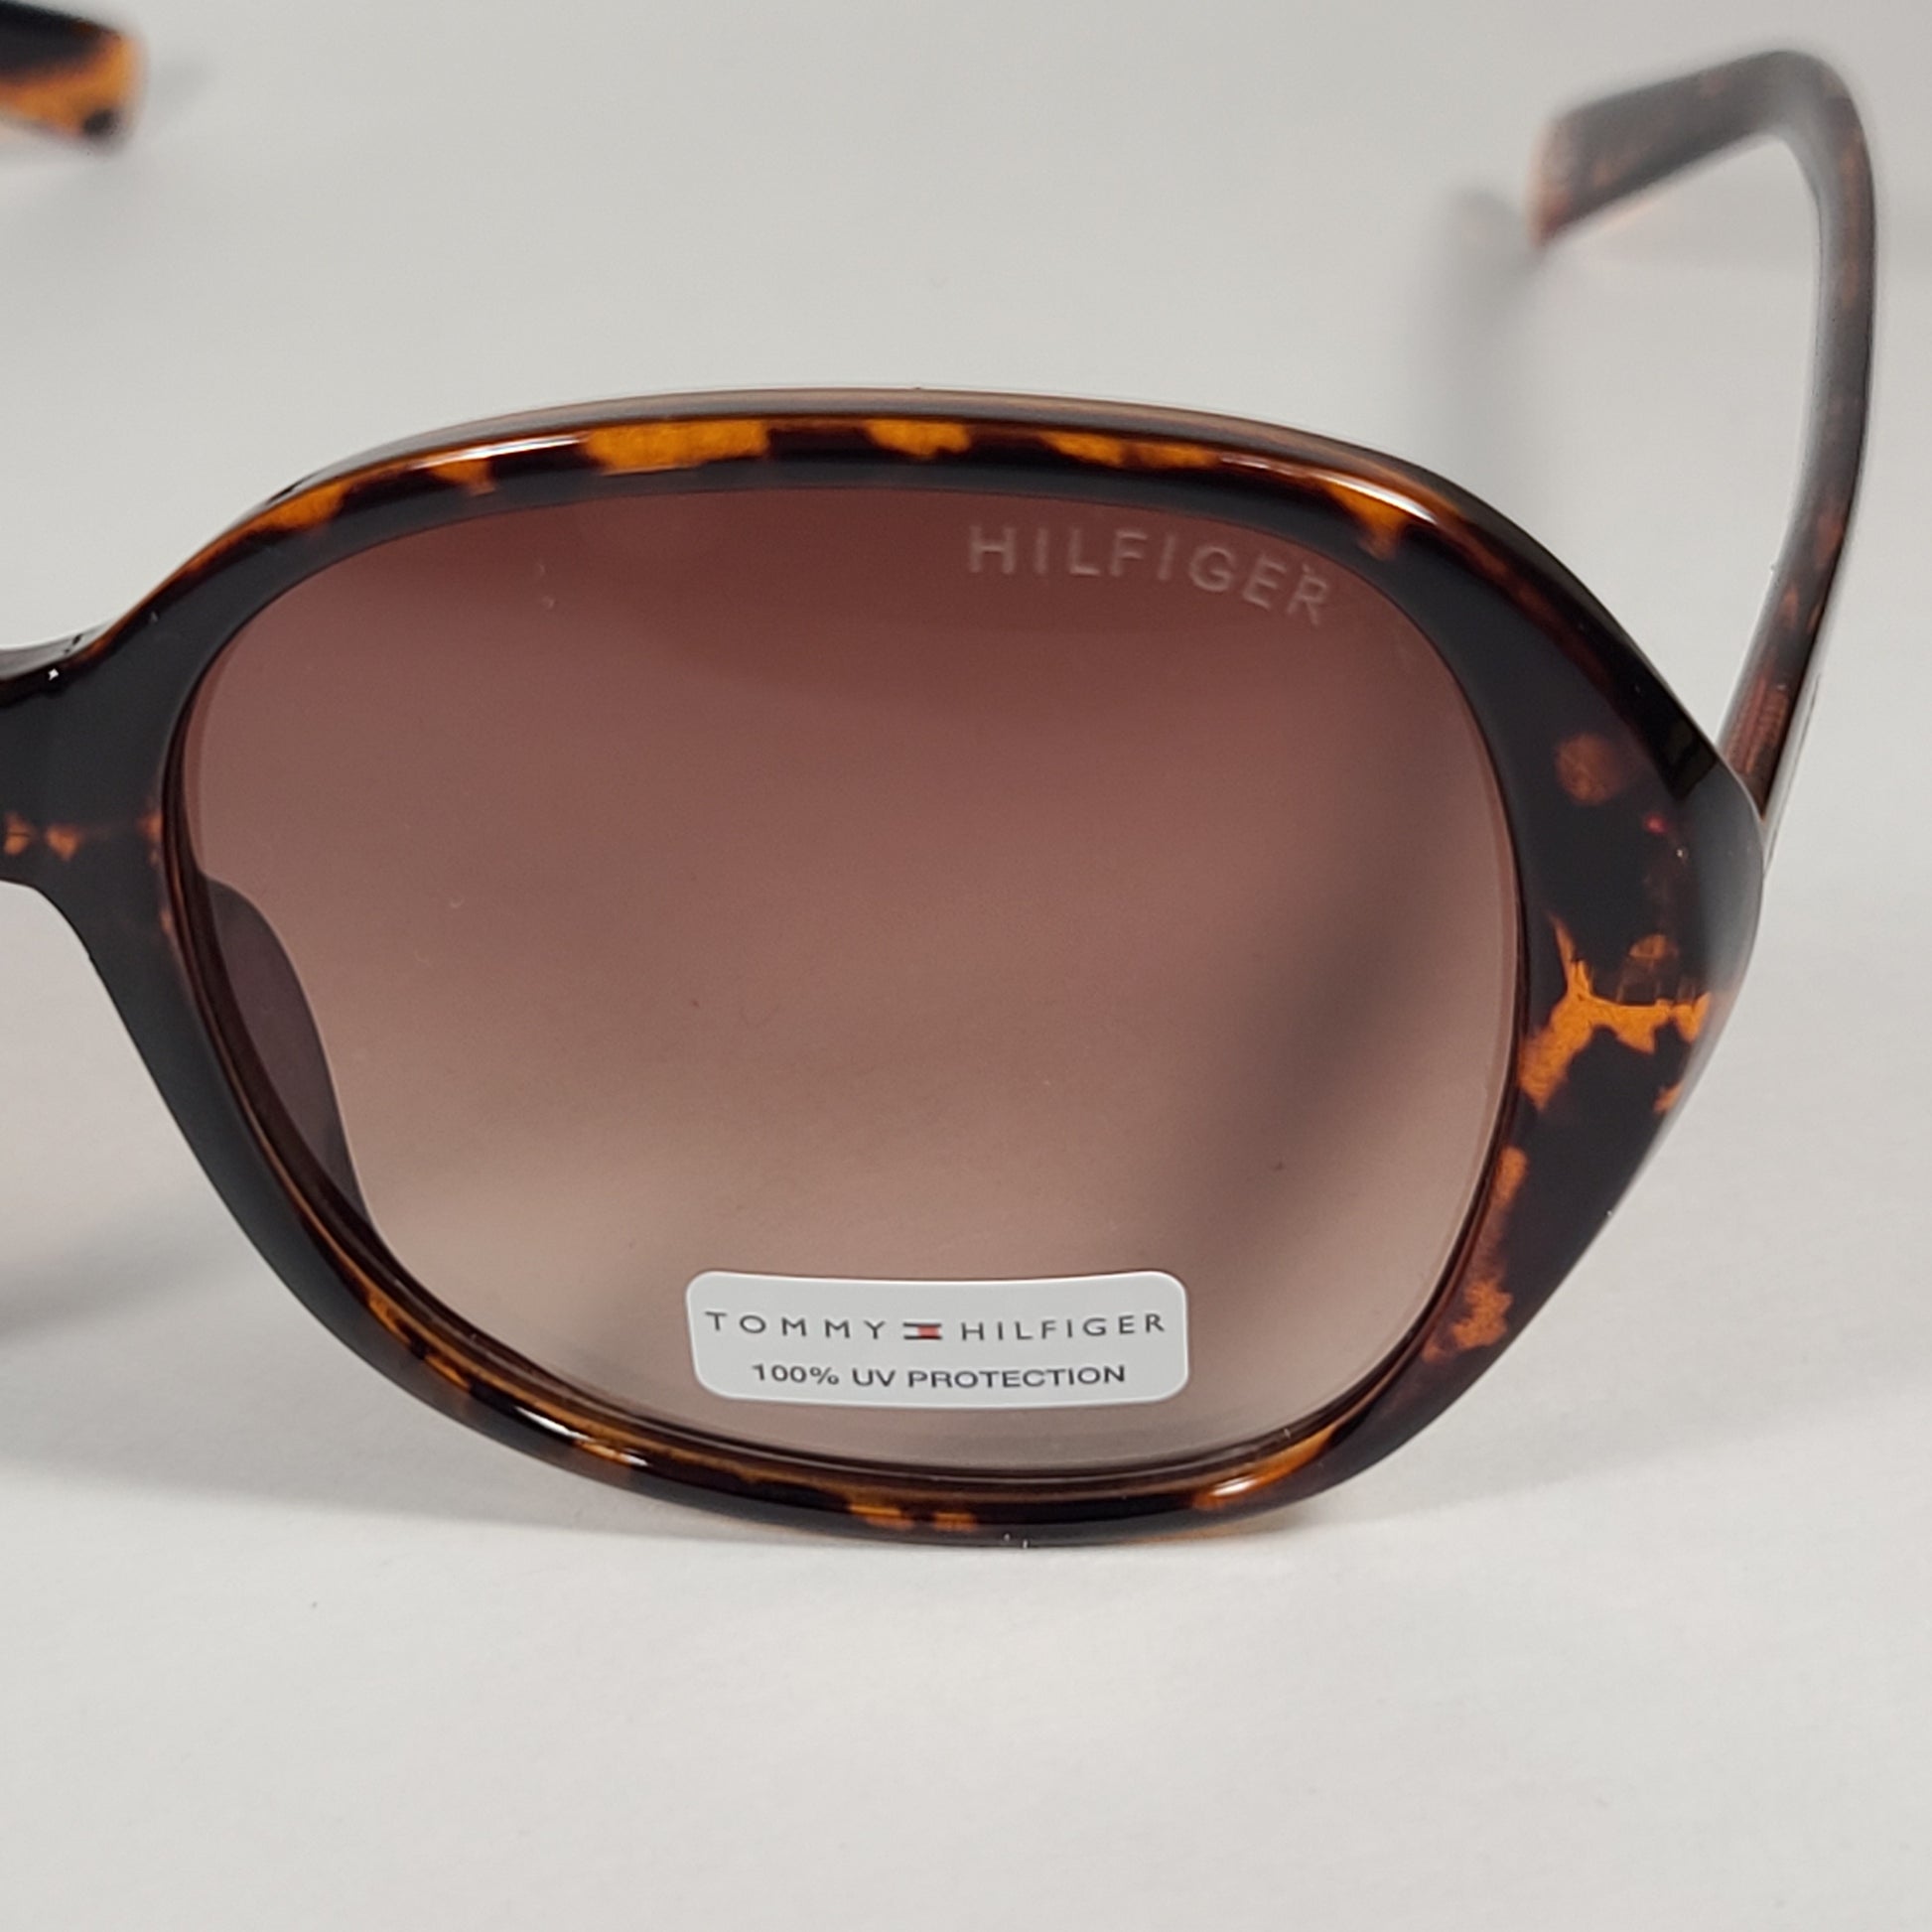 Tommy Hilfiger Peggy Oval Sunglasses Brown Tortoise Gradient Lens PEGGY WP OL514 - Sunglasses